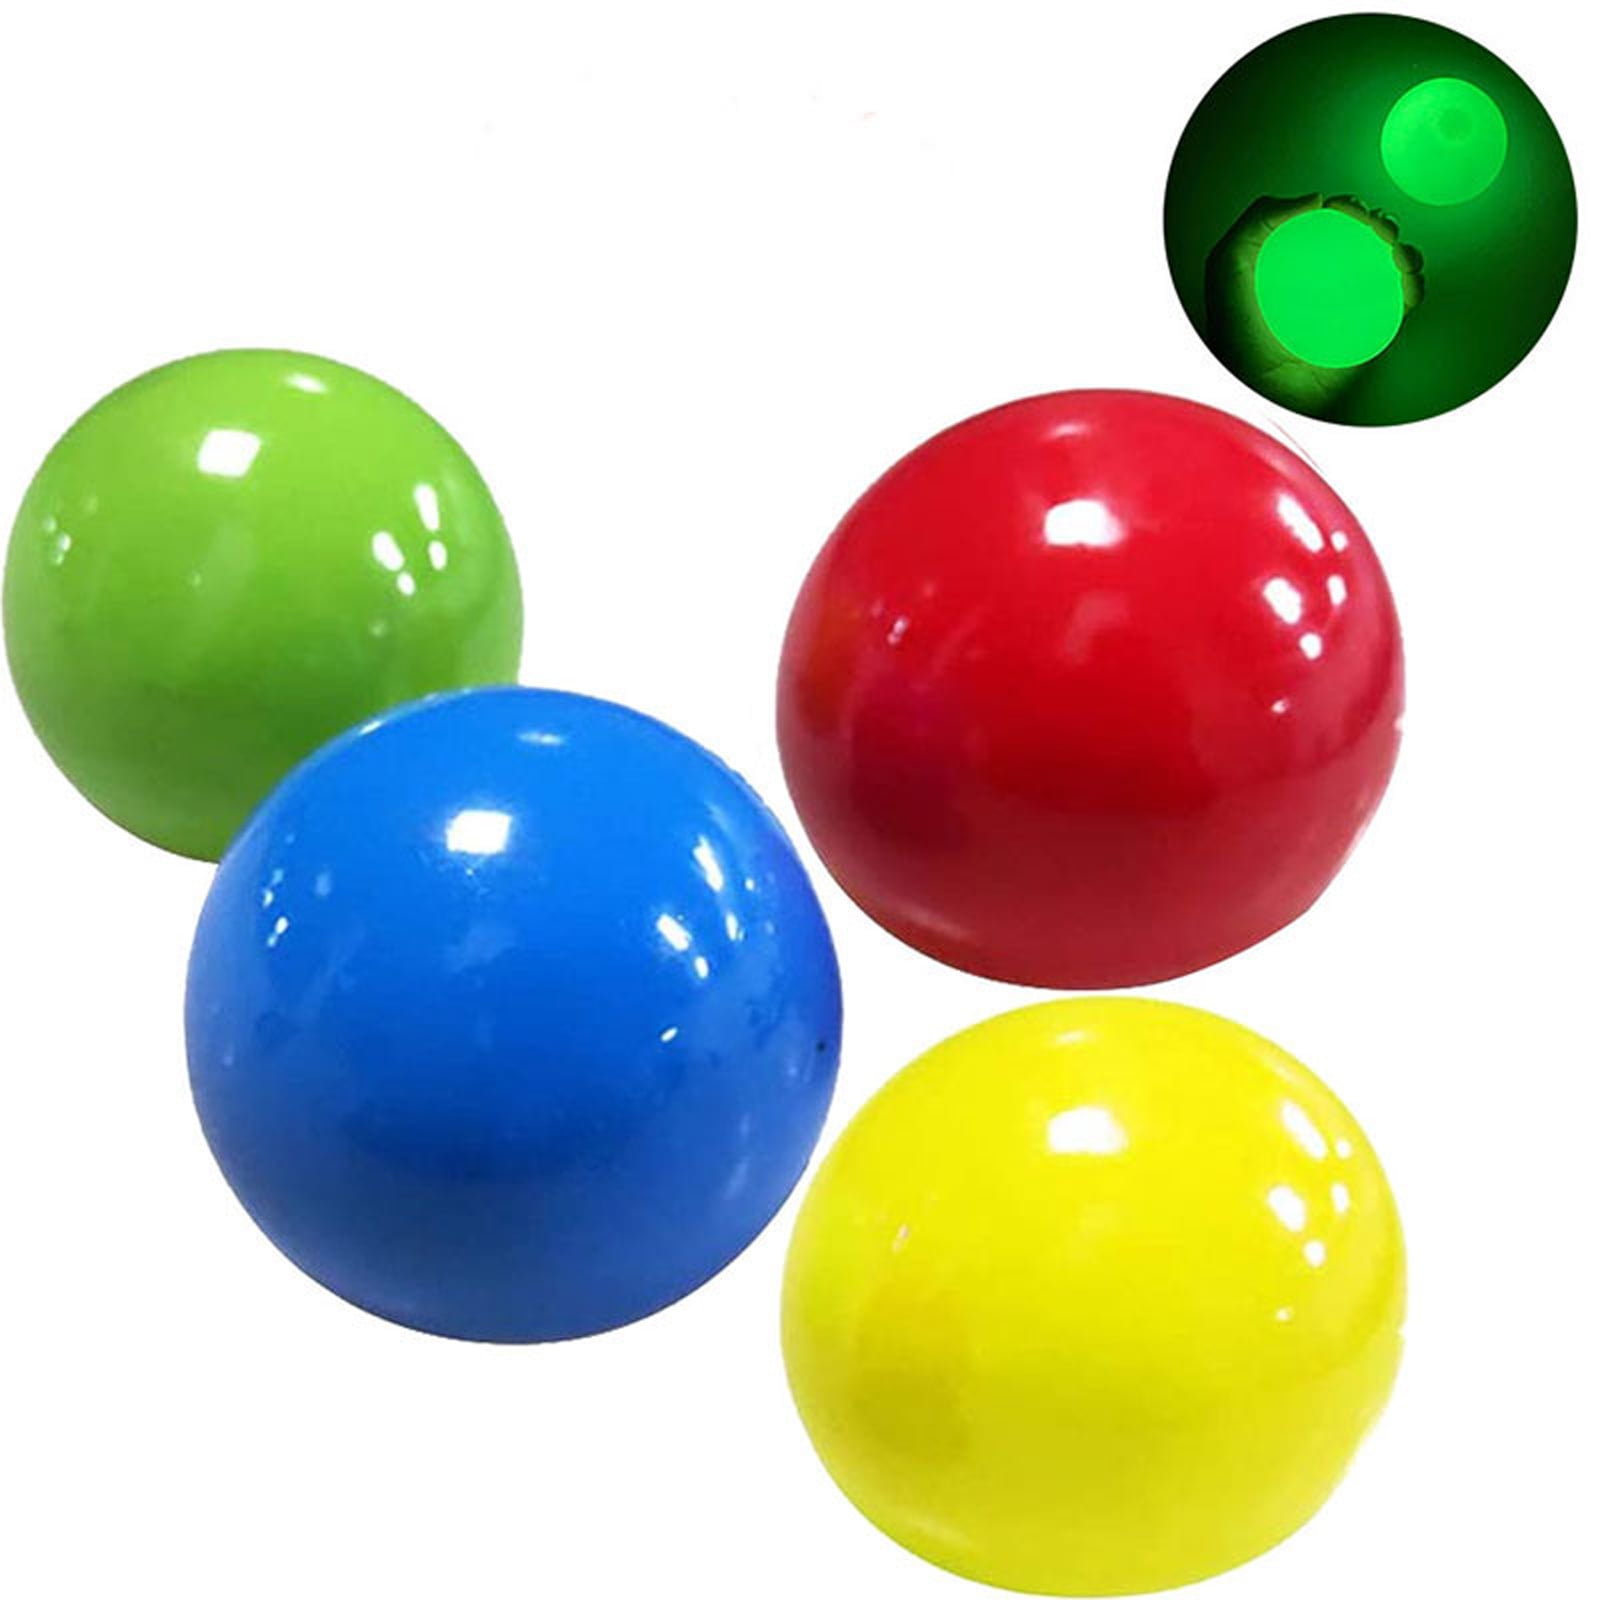 12 Pieces Glow Balls Sticky Wall Balls Sticky Ceiling Balls Stress Relief Balls Ceiling Luminous Sticky Ball Fun Decompression Toy for ADHD OCD Anxiety